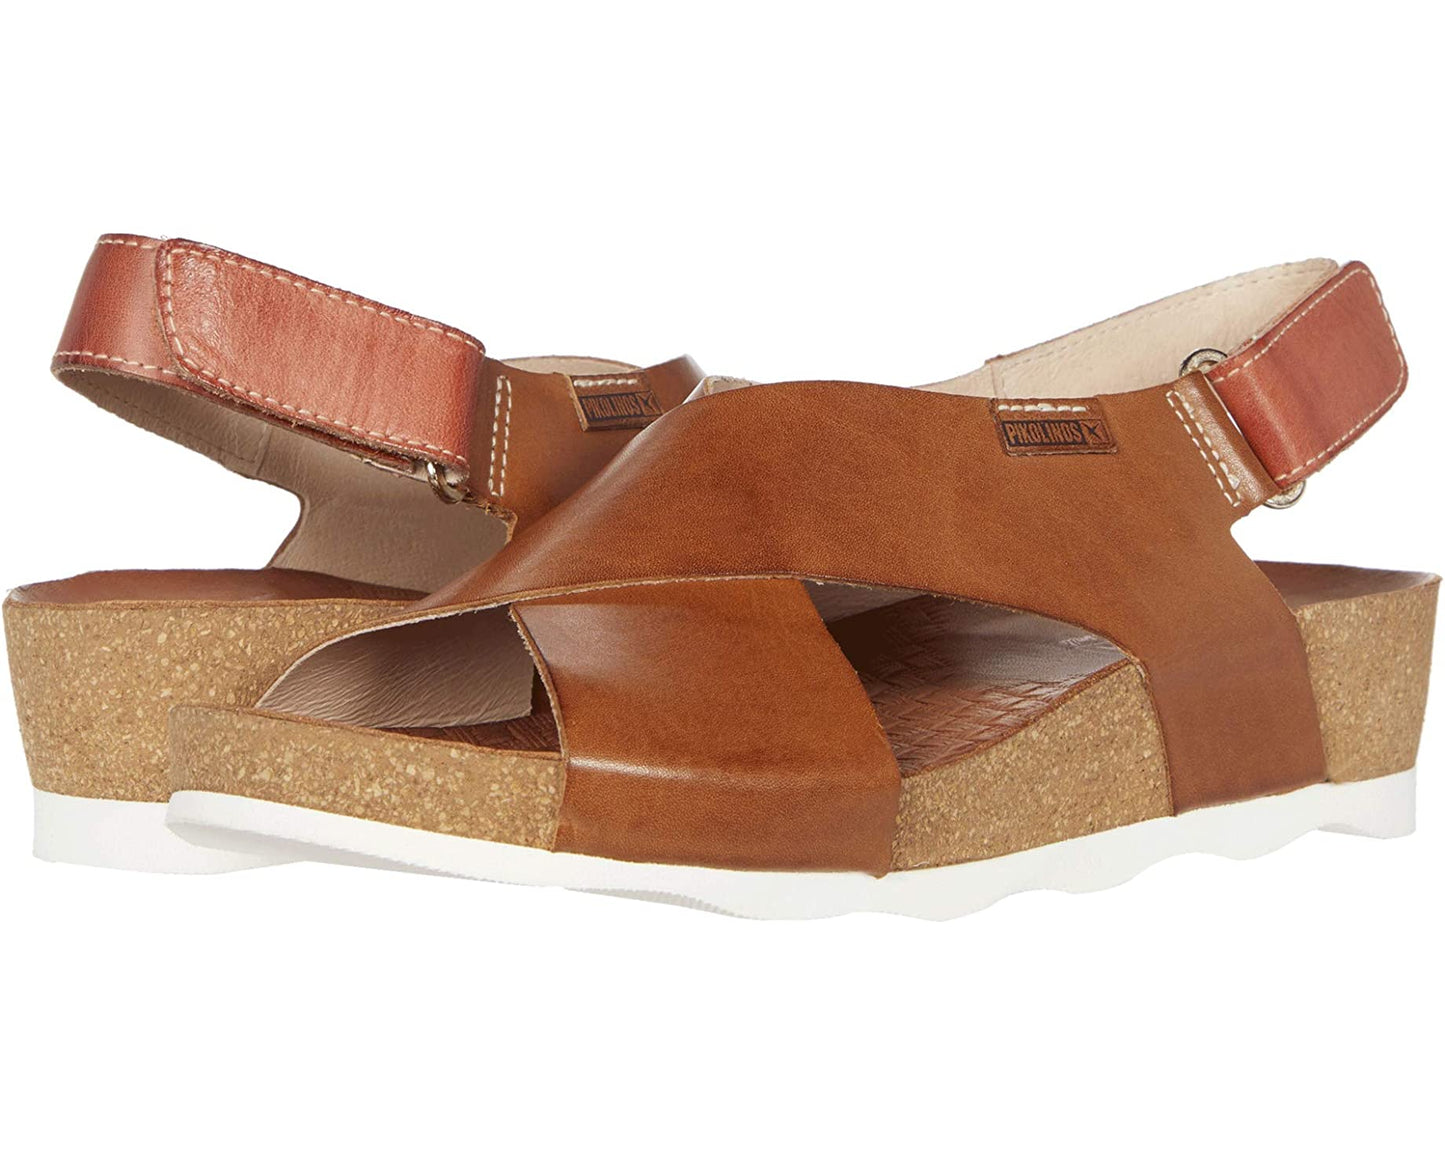 Mahon Cross-Strapped Sandals